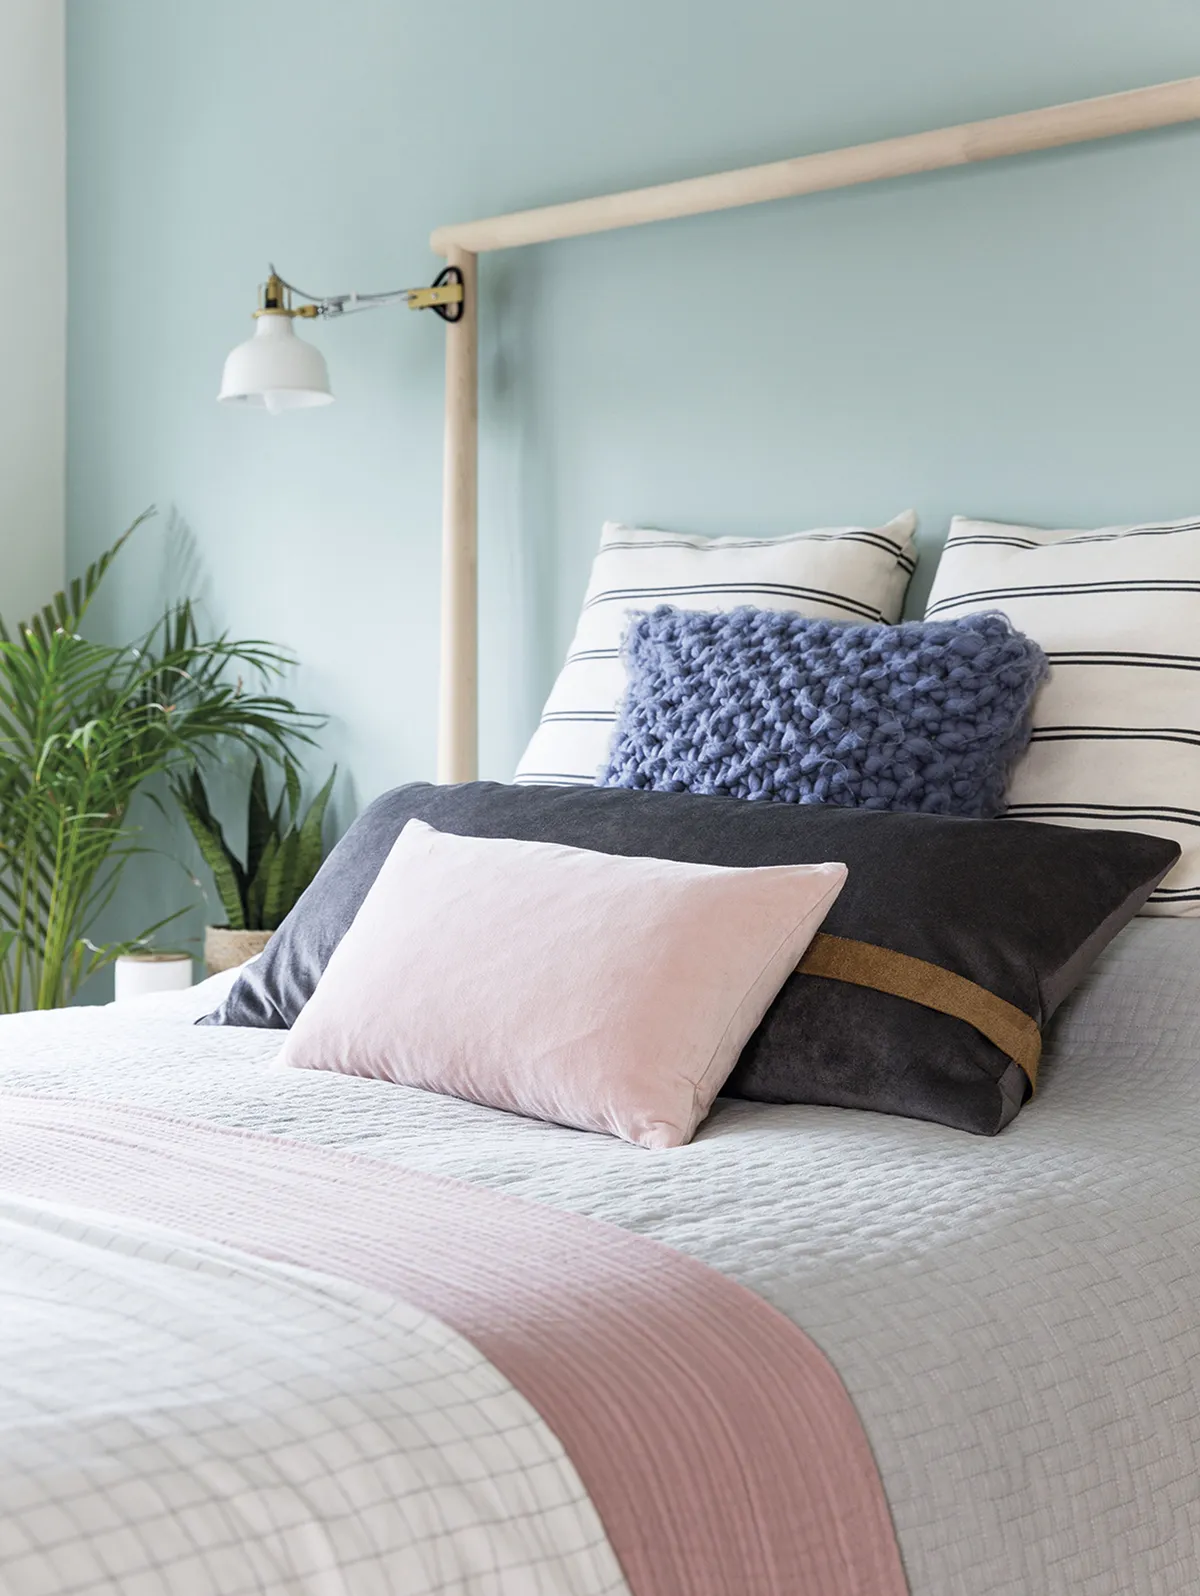 Layering up cushions, blankets and waffle bed linen in different tones and textures brings the bed to life, while a mix of fresh and faux plants helps to soften the space